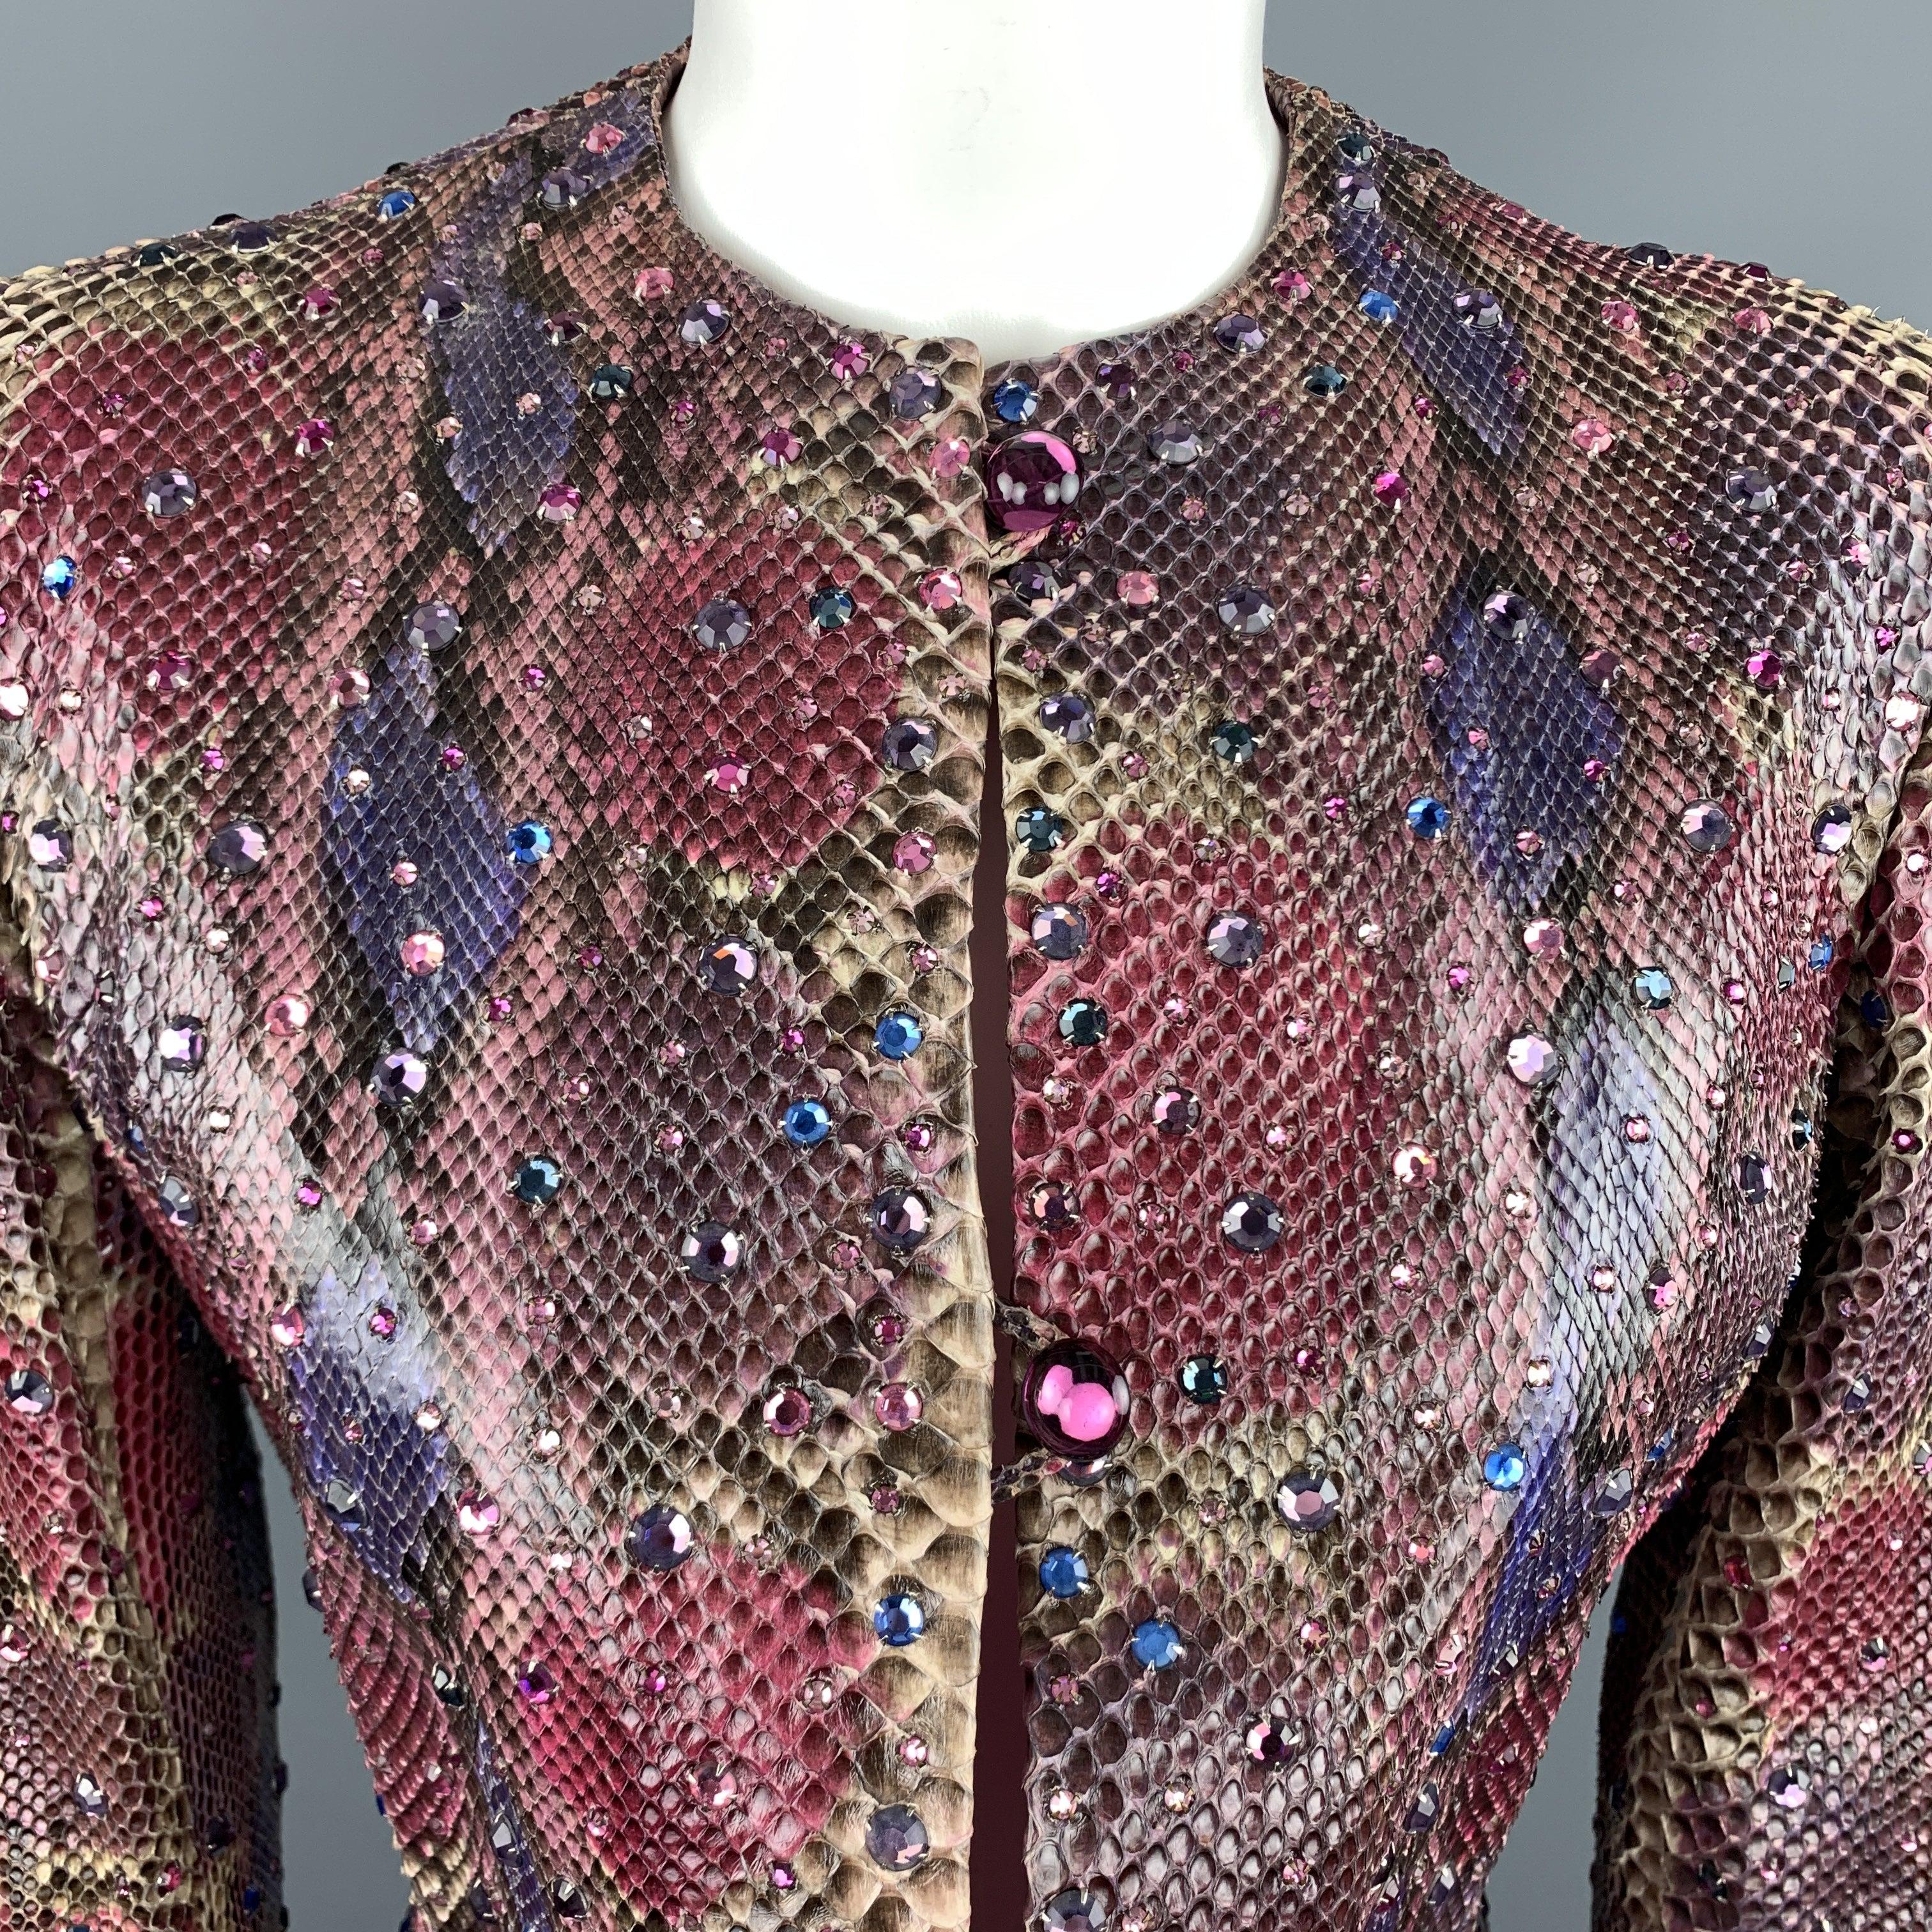 This fabulous 1980's BILL BLASS jacket comes in pink and purple custom colored Snake skin with a collarless neckline, cropped hem, three jewel button closure, and multi color rhinestone studs throughout. Minor Wear on Liner.
Excellent
Pre-Owned